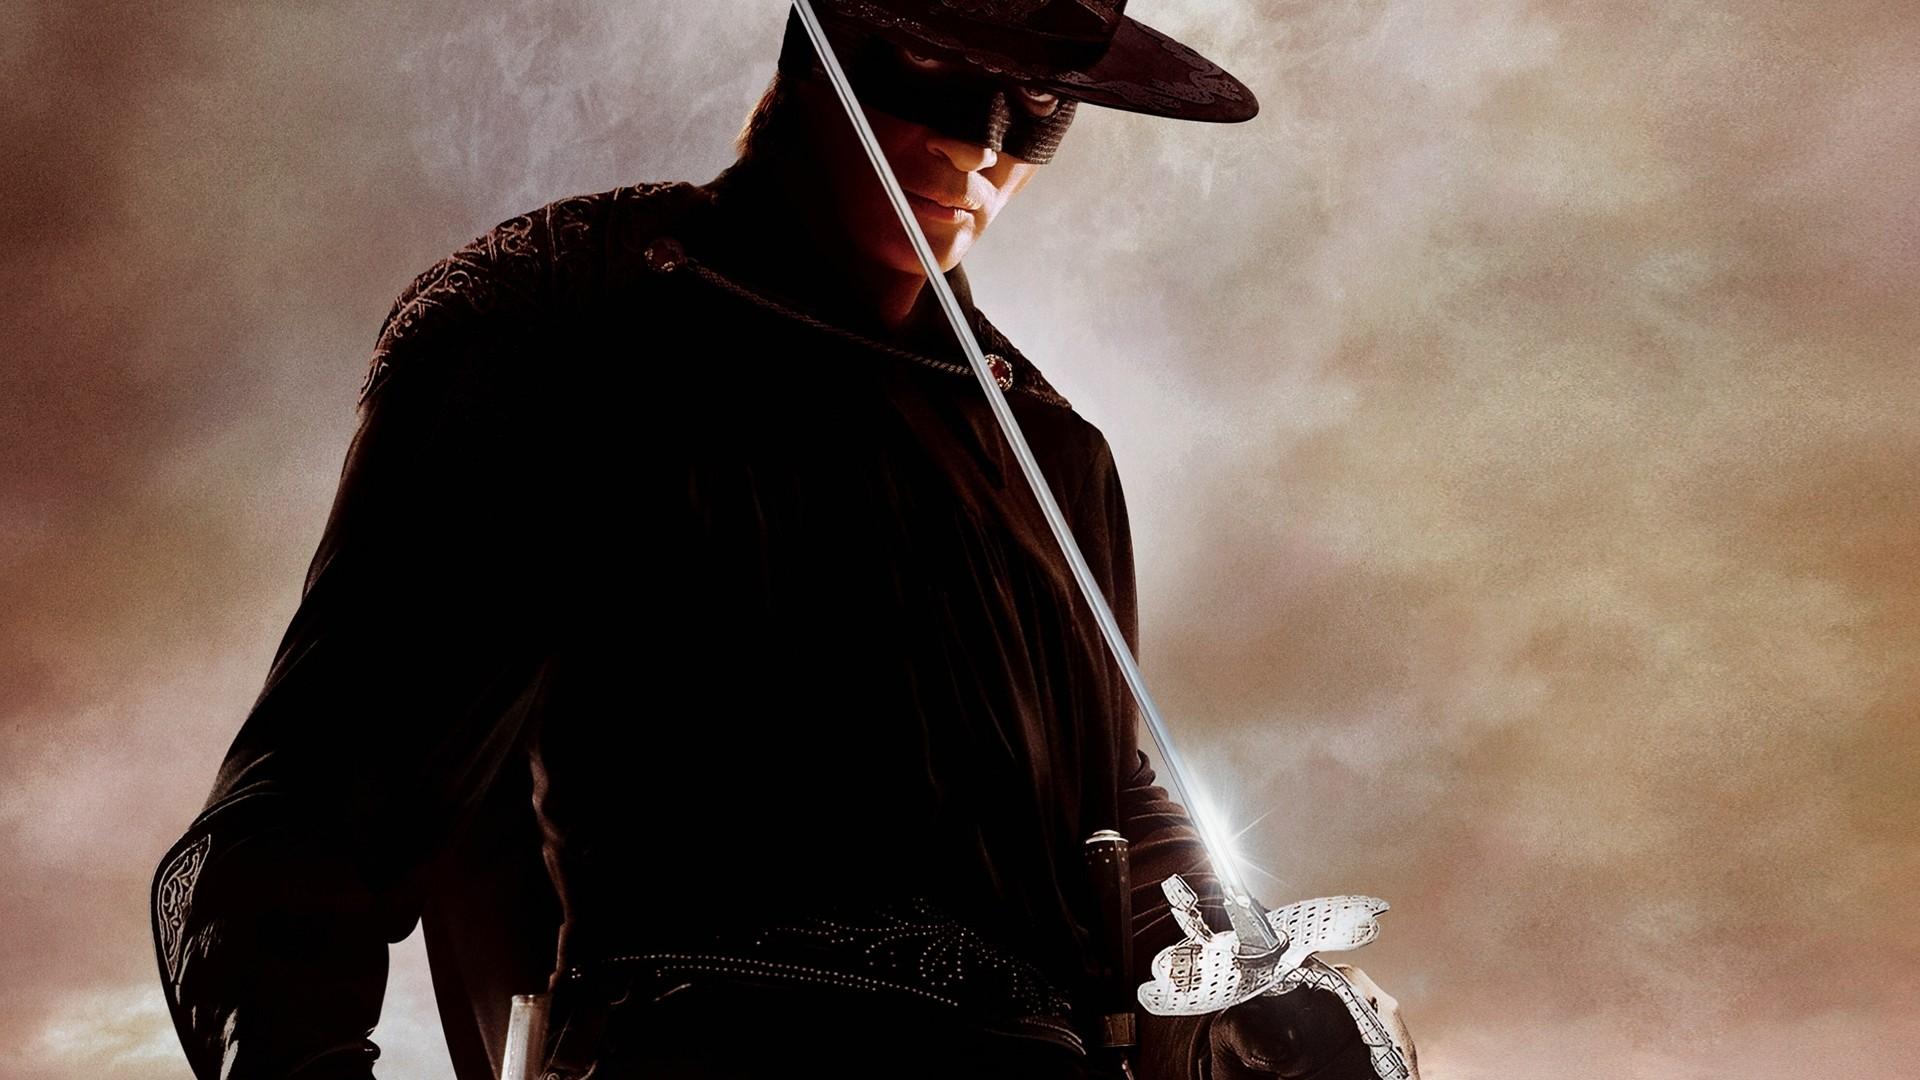 too much liver Employee The Mask of Zorro HD Wallpaper